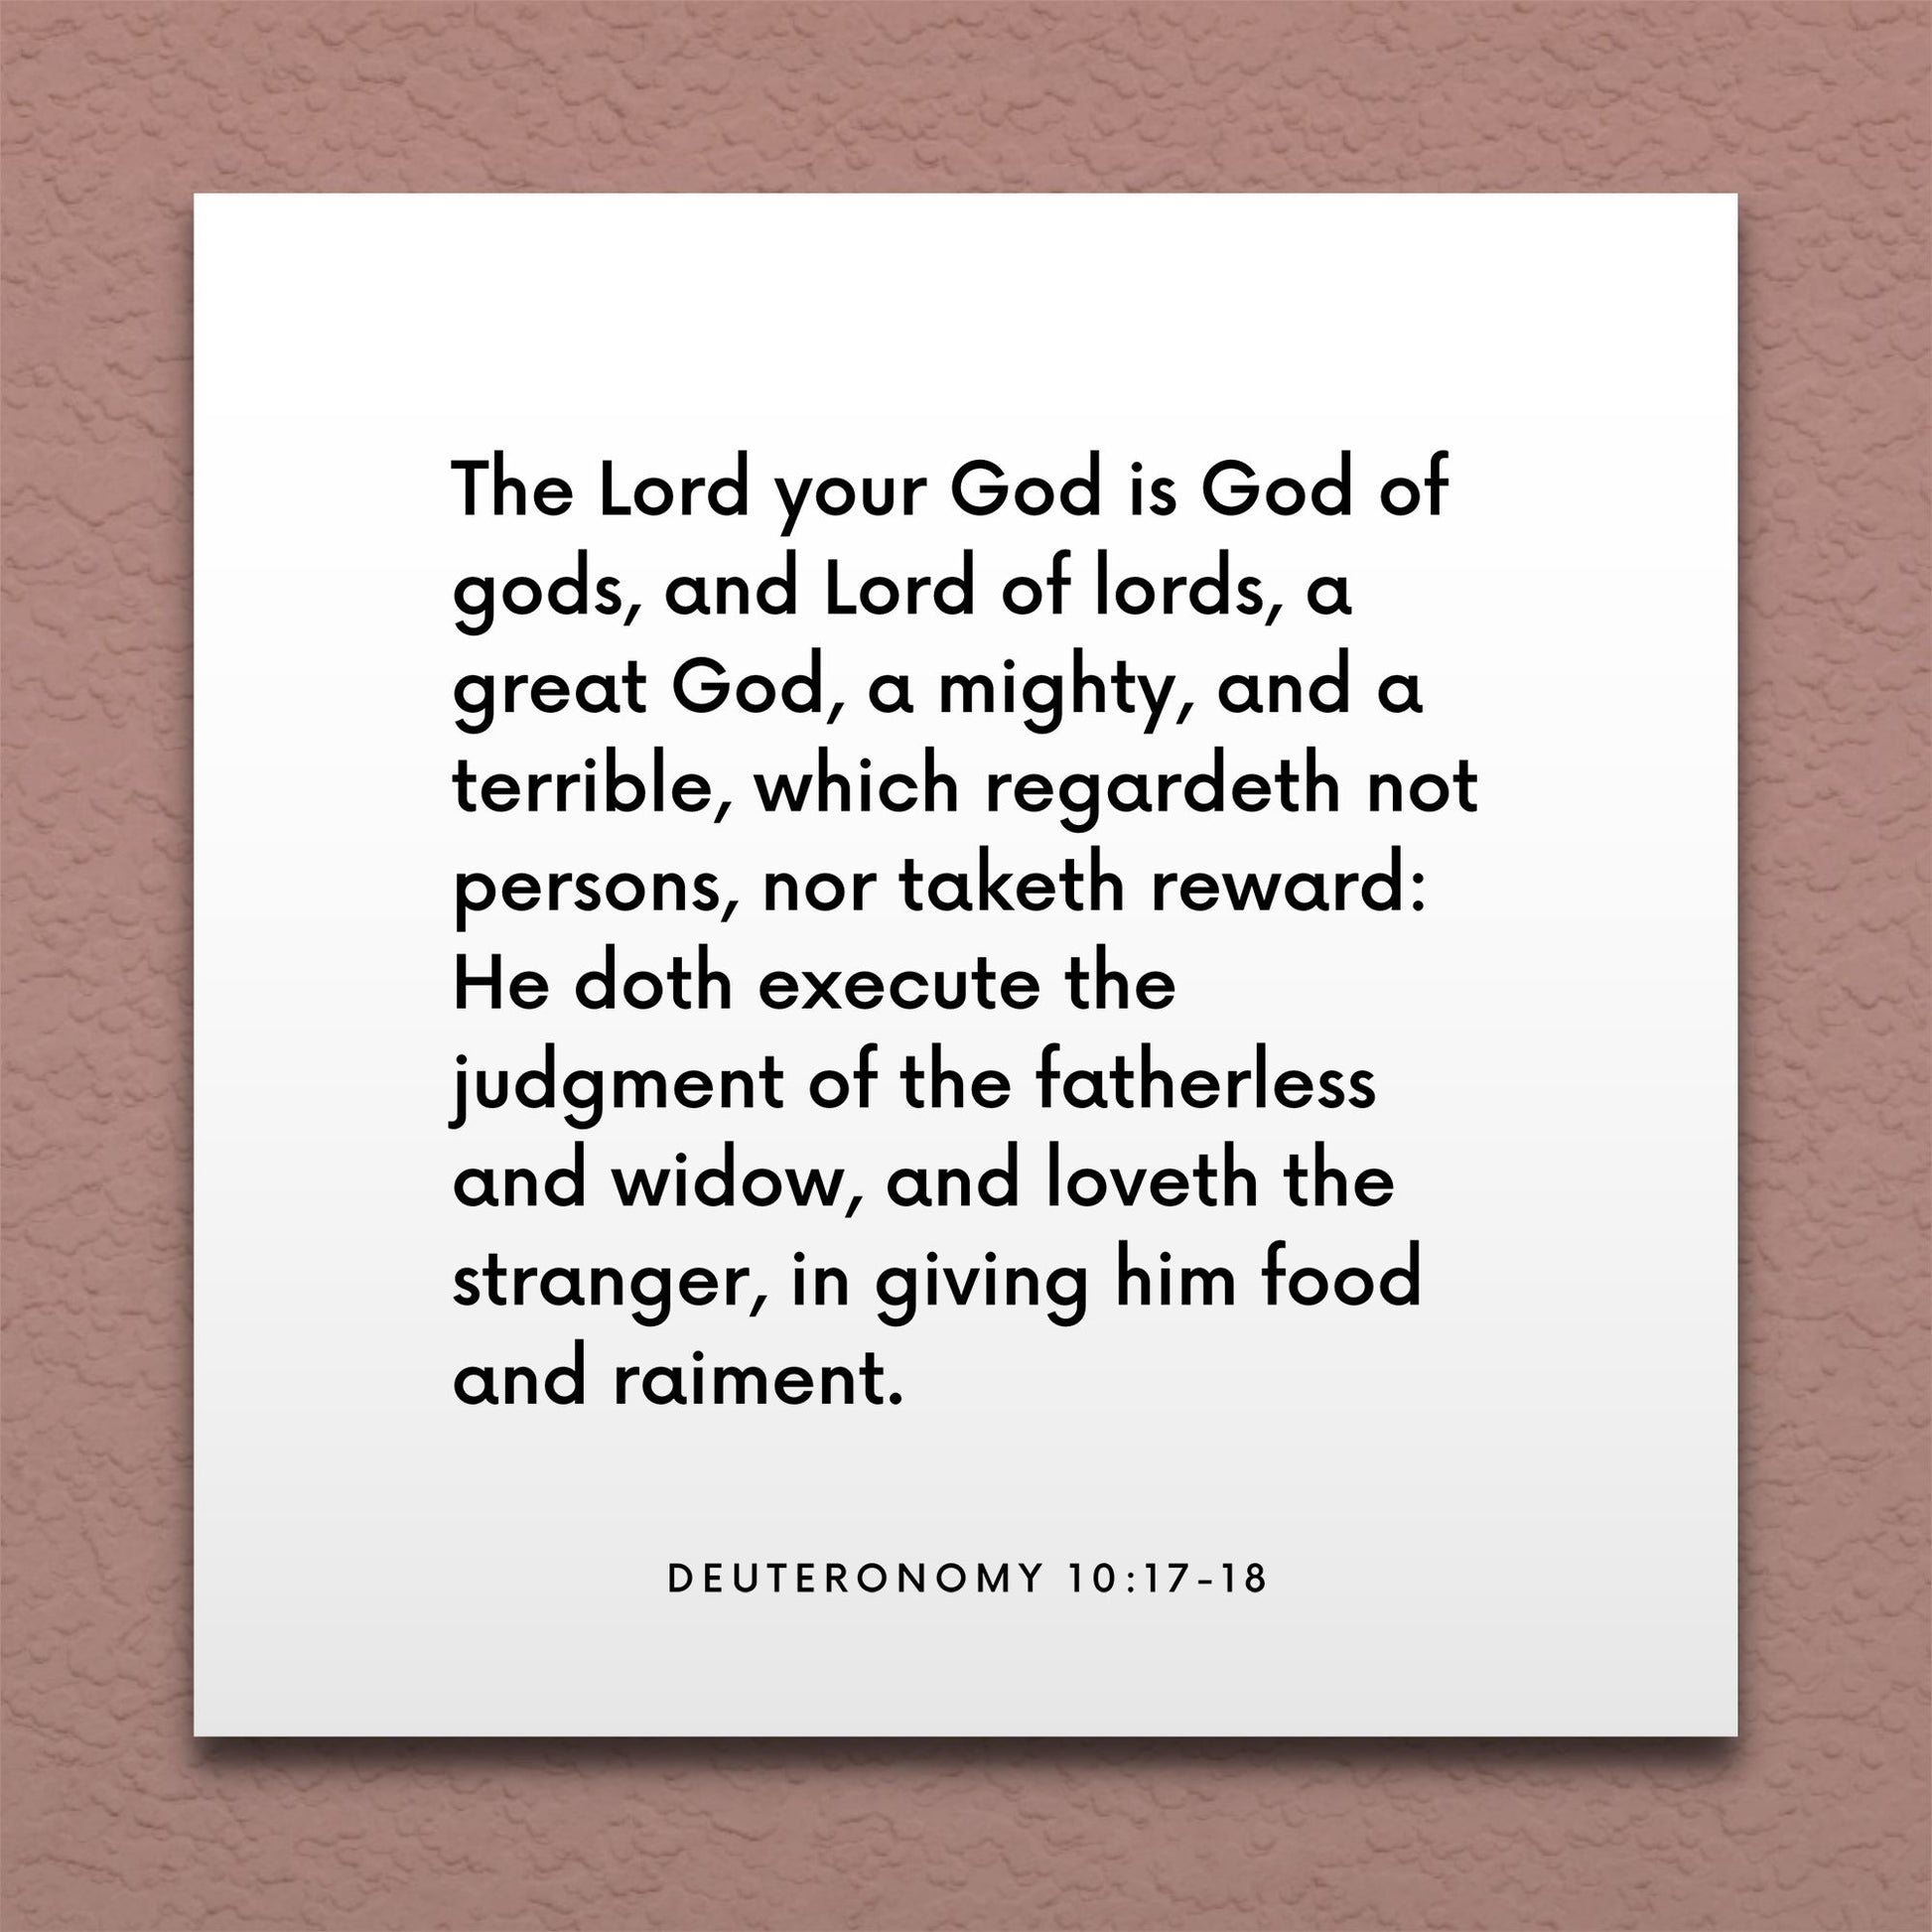 Wall-mounted scripture tile for Deuteronomy 10:17-18 - "The Lord your God is God of gods"